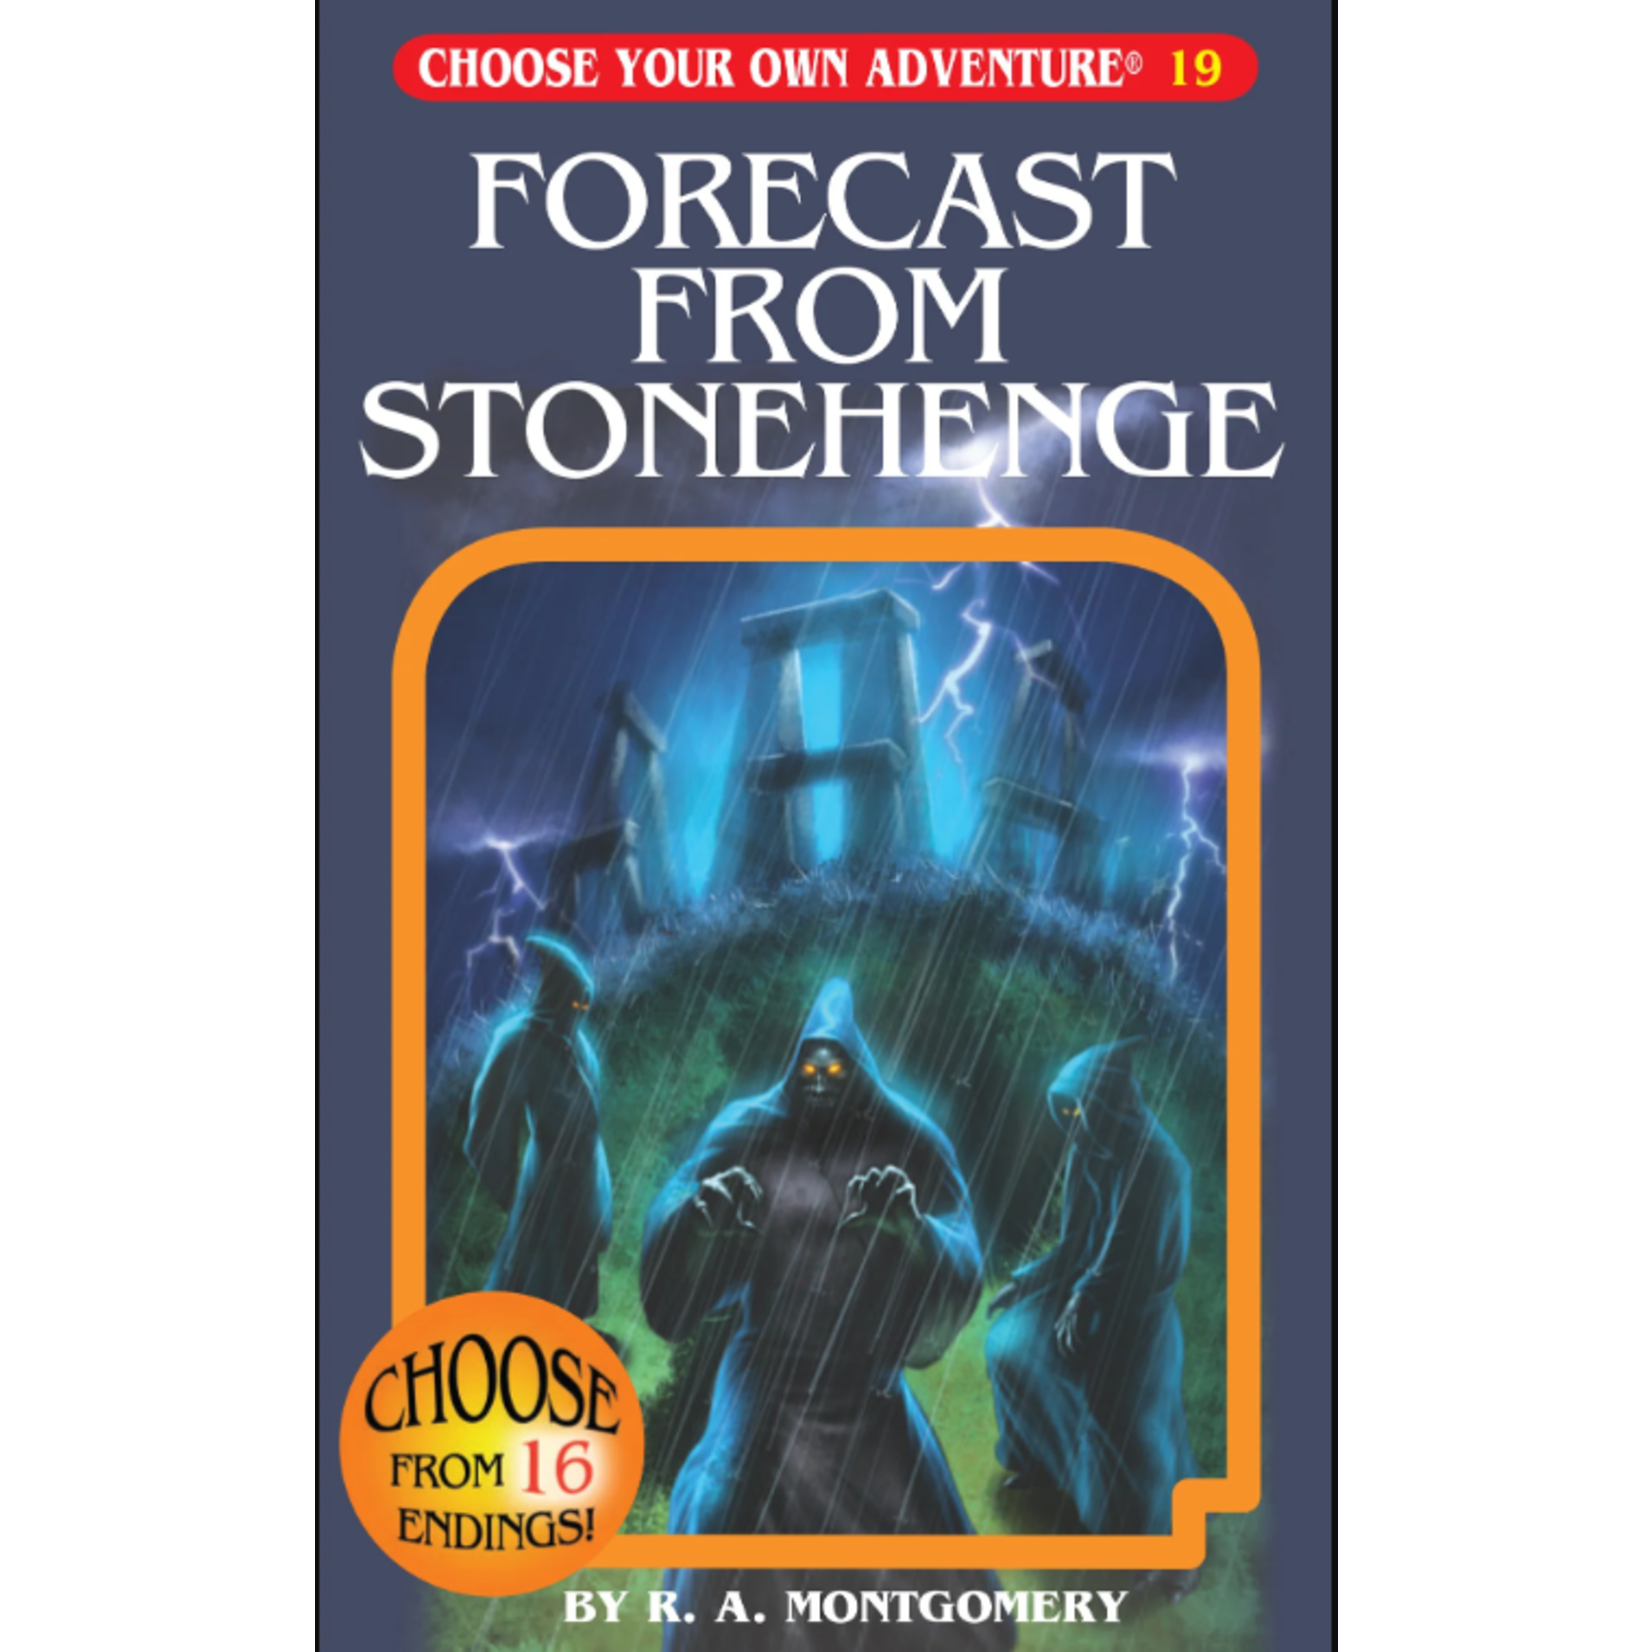 Choose Your Own Adventure Choose Your Own Adventure 19: Forecast From Stonehenge  - R. A. Montgomery